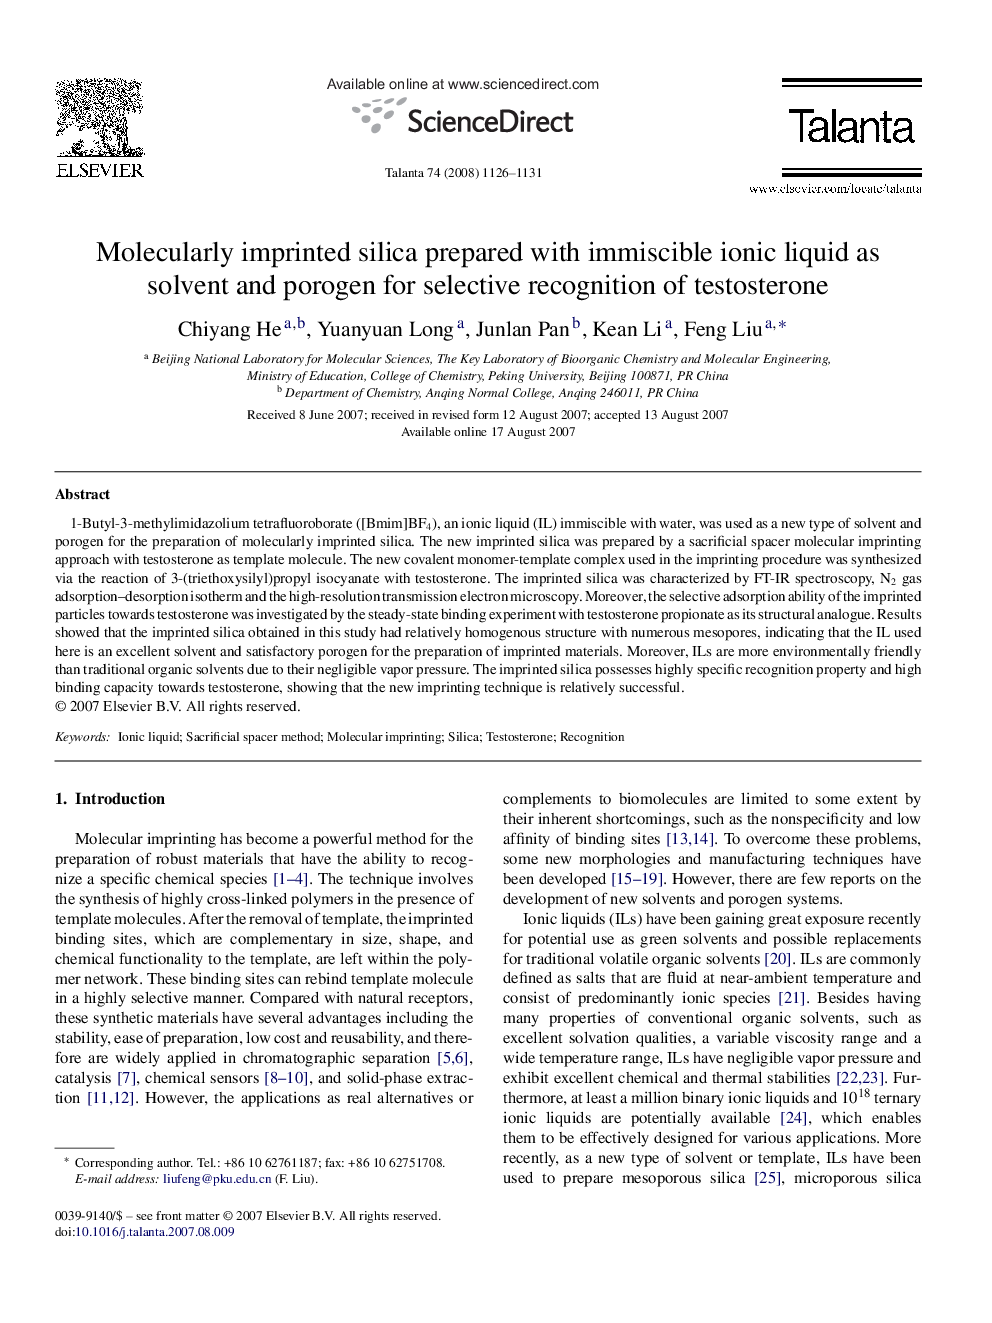 Molecularly imprinted silica prepared with immiscible ionic liquid as solvent and porogen for selective recognition of testosterone